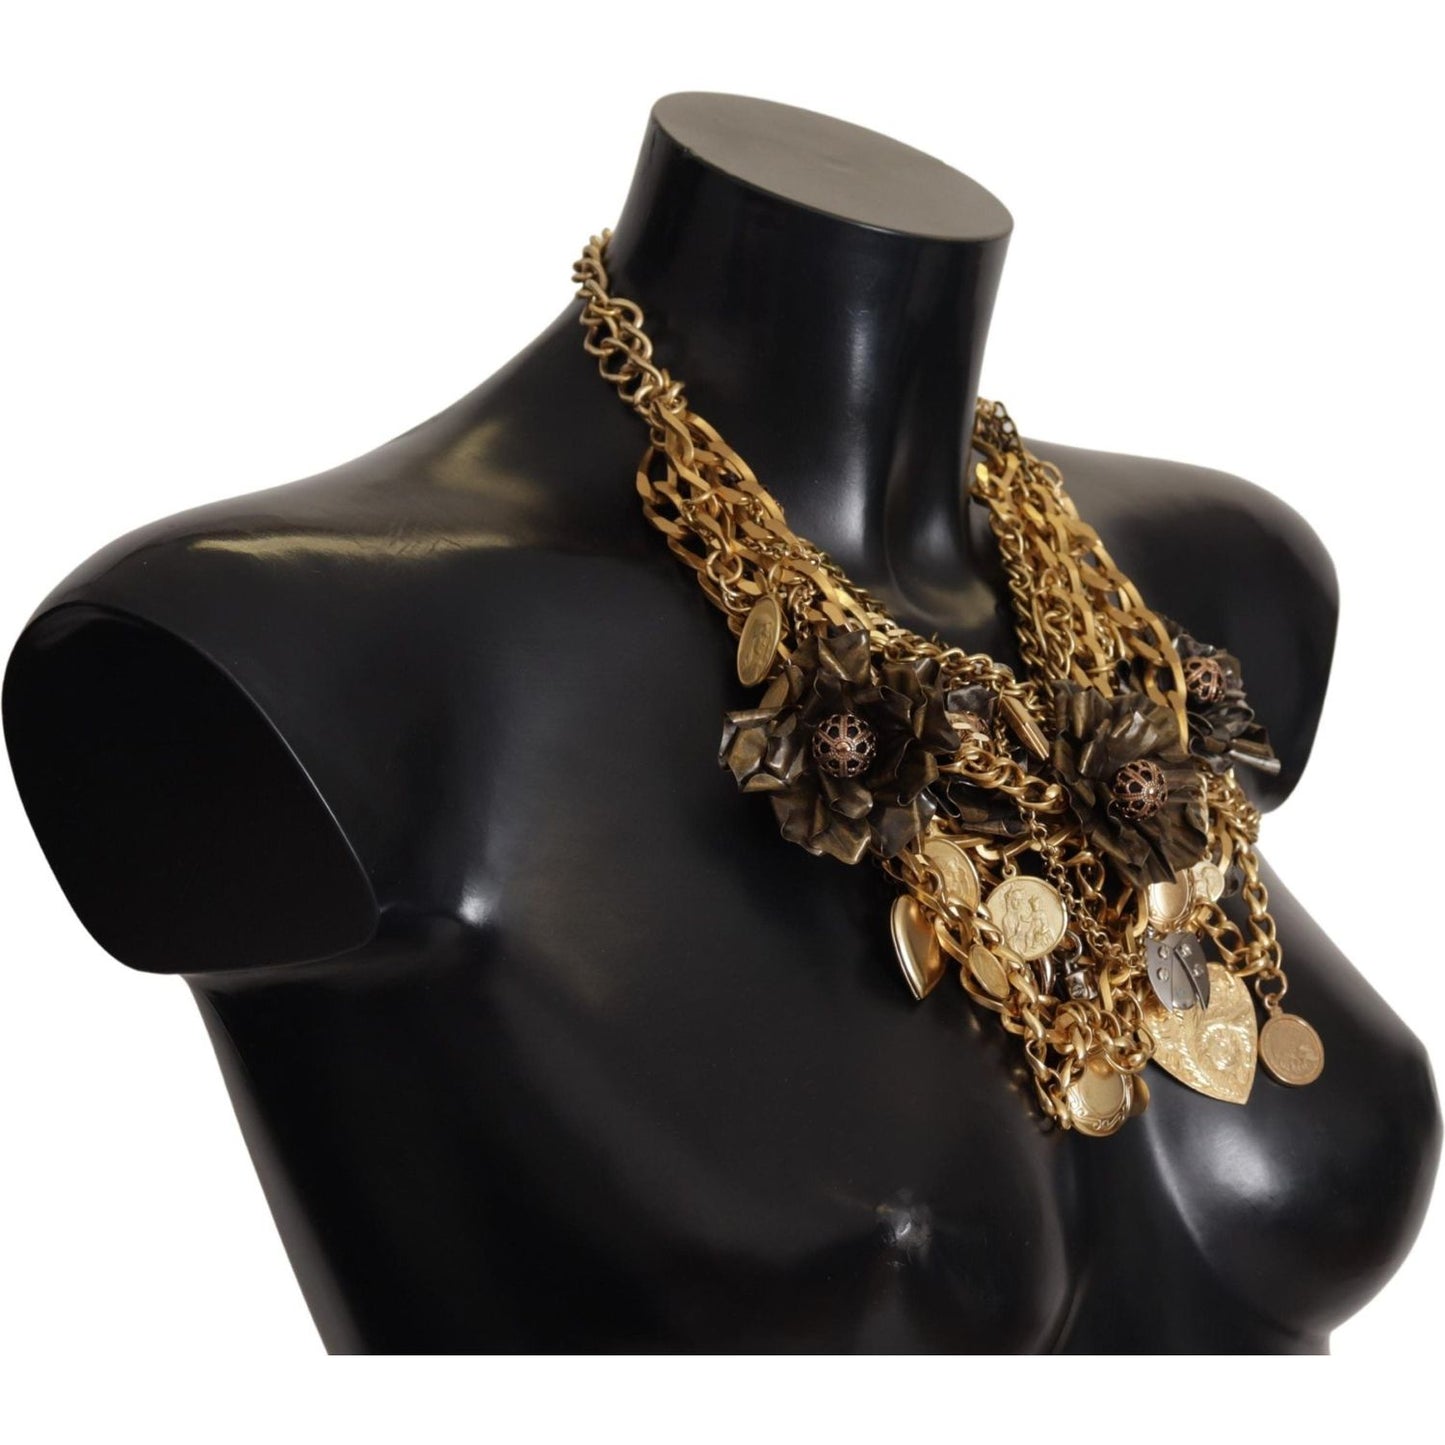 Dolce & Gabbana Sicilian Glamour Gold Statement Necklace gold-brass-sicily-charm-heart-statement-necklace WOMAN NECKLACE IMG_3828-scaled-0c50f362-7c9.jpg